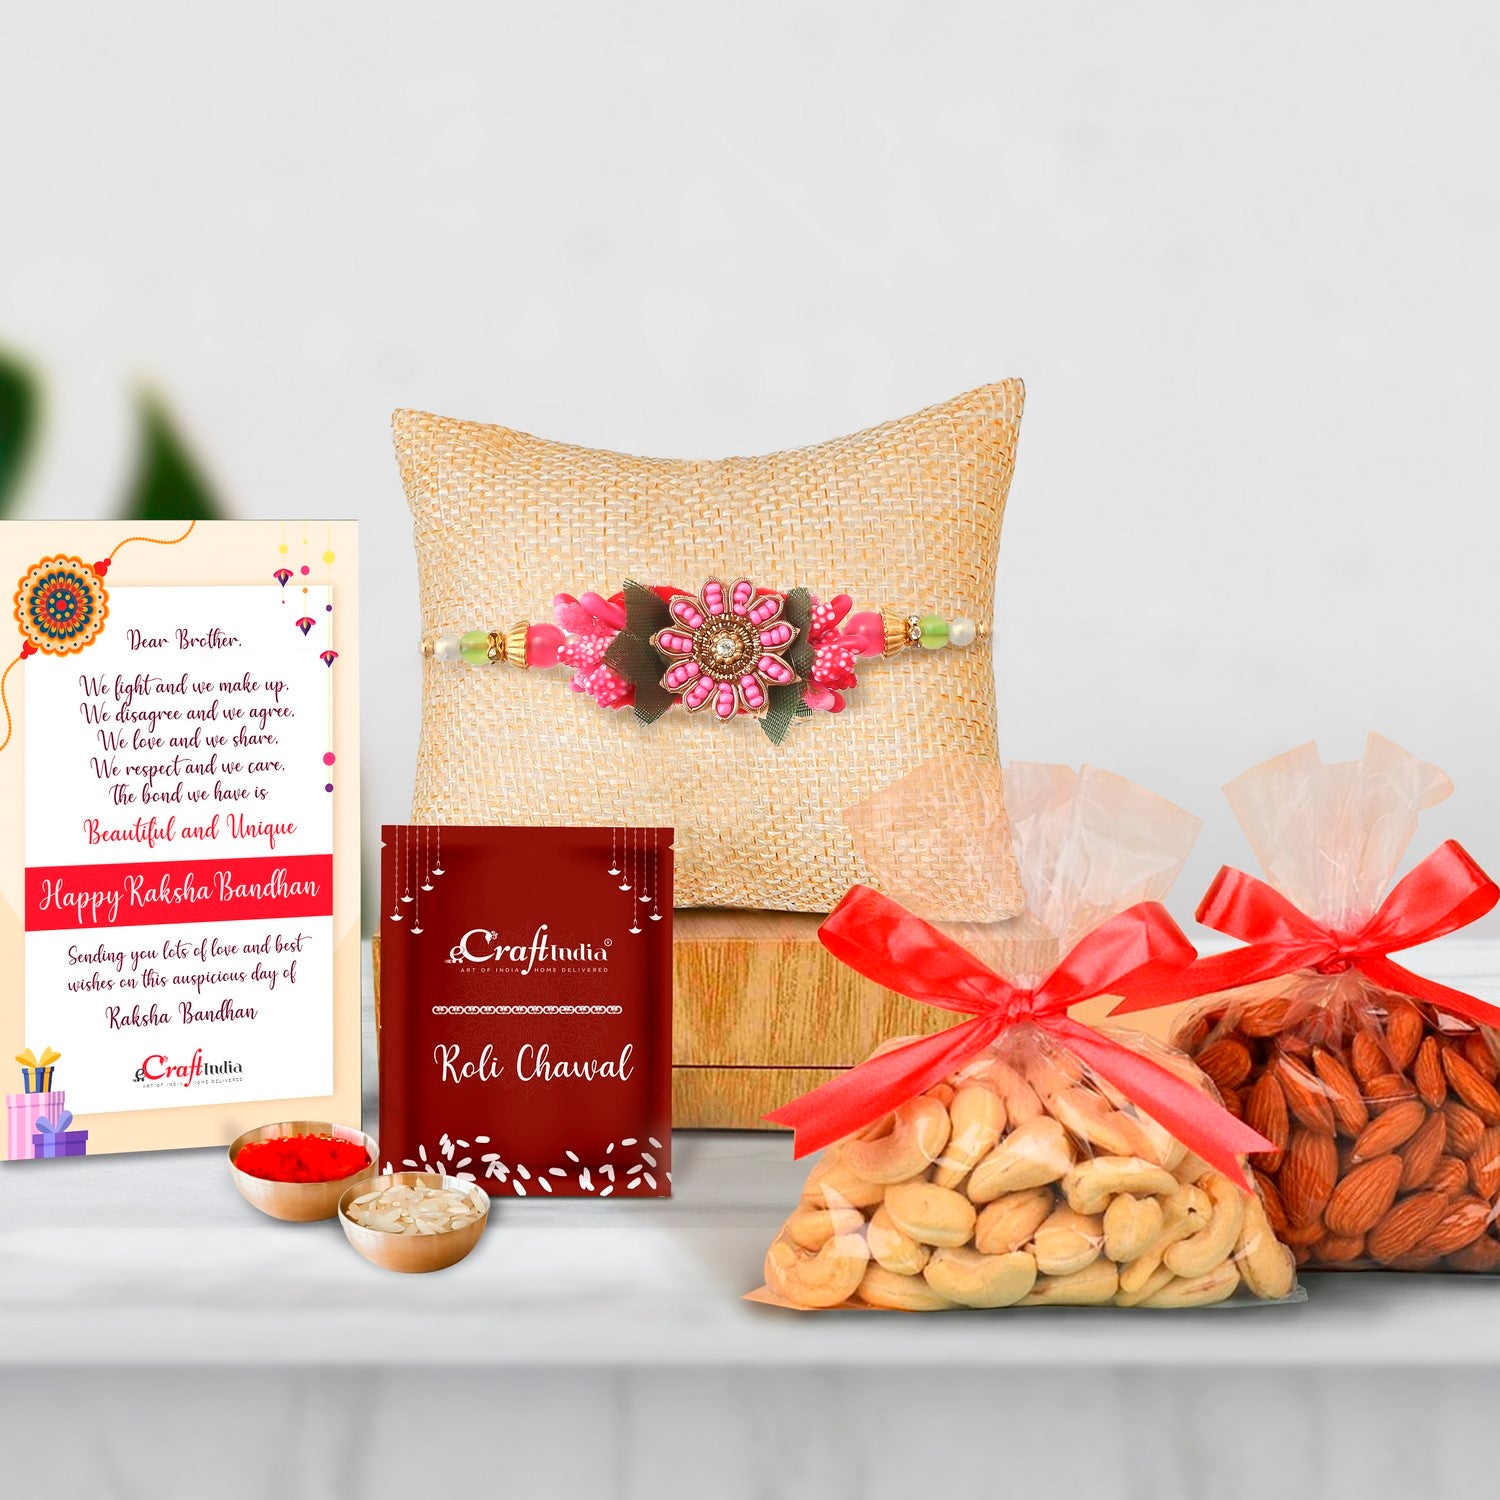 Designer Rakhi with Badam and Cashew (200 gm each, total 400 gm) and Roli Chawal Pack, Best Wishes Greeting Card